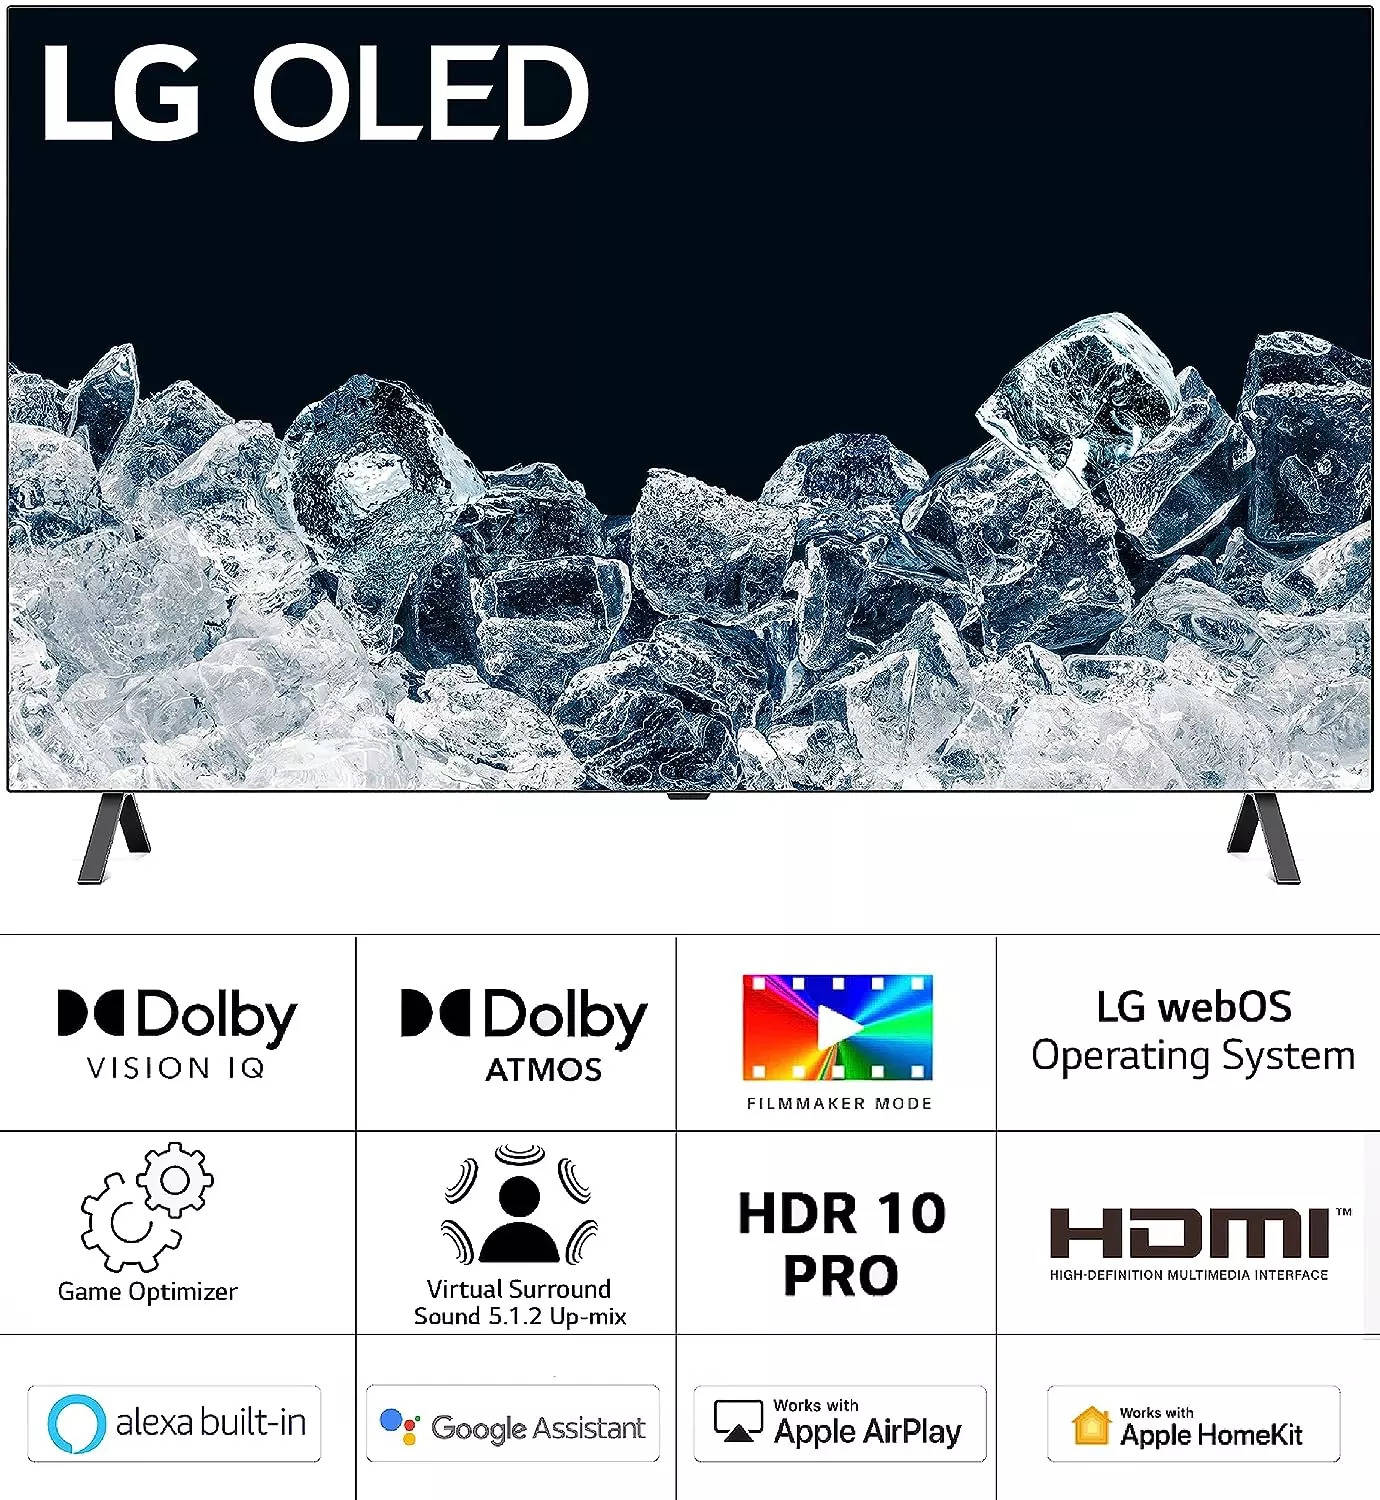 This is the best time in a decade to splurge on a premium OLED TV